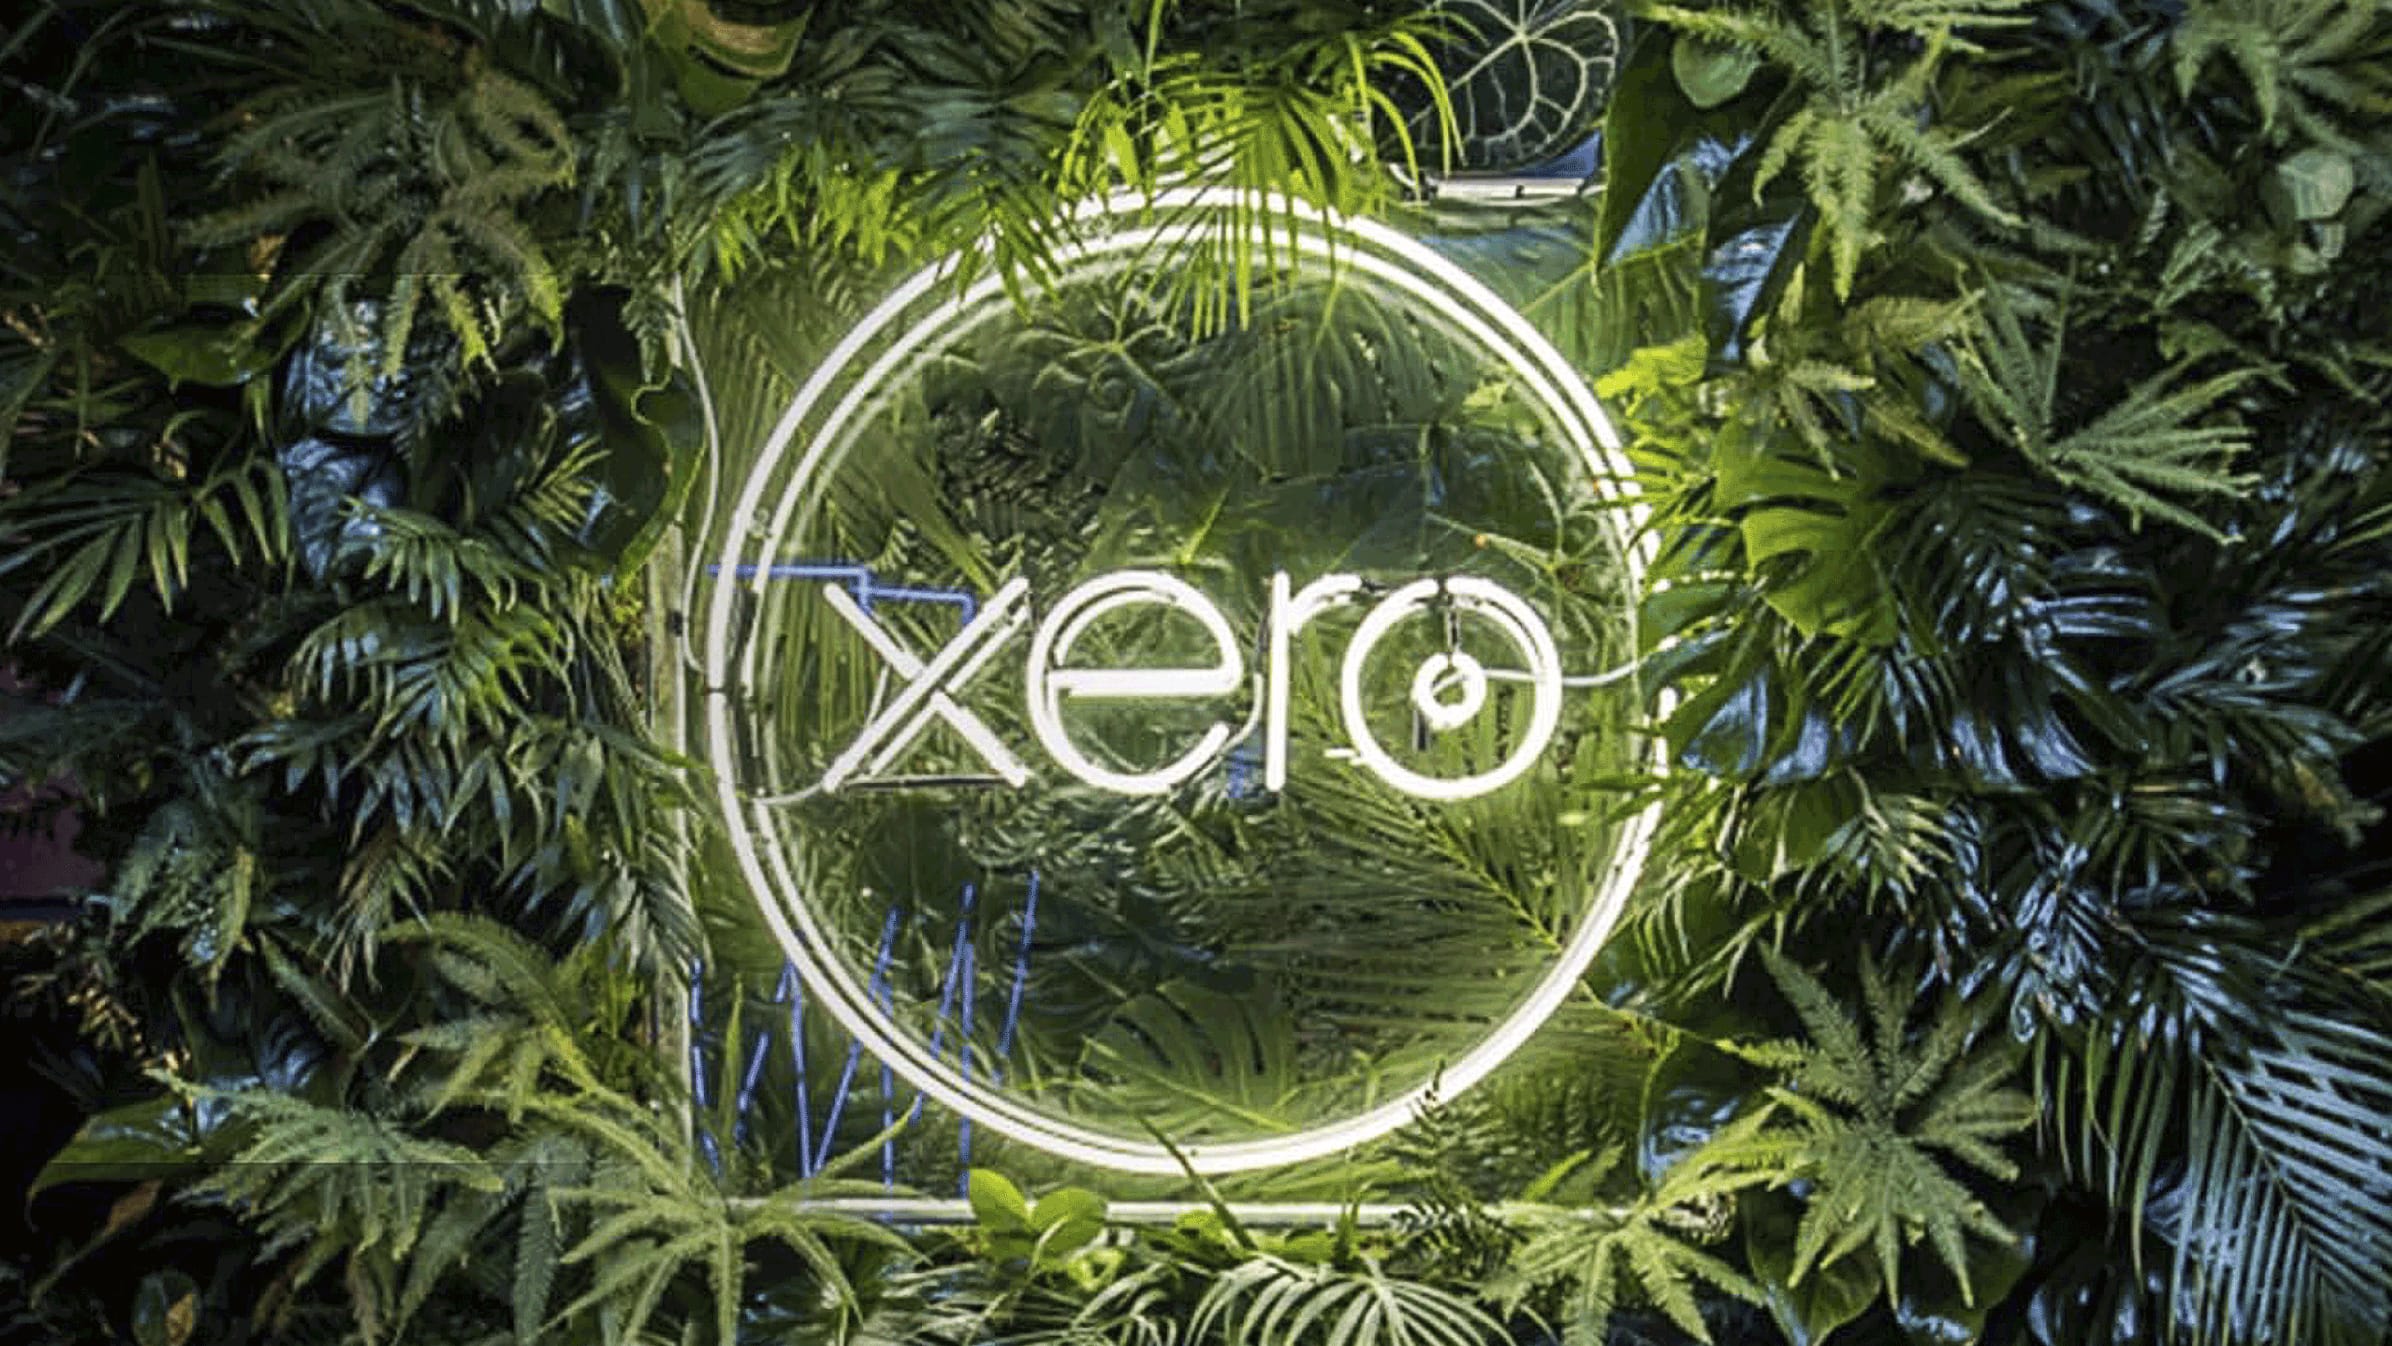 The Xero logo in neon lights against a foliage background.